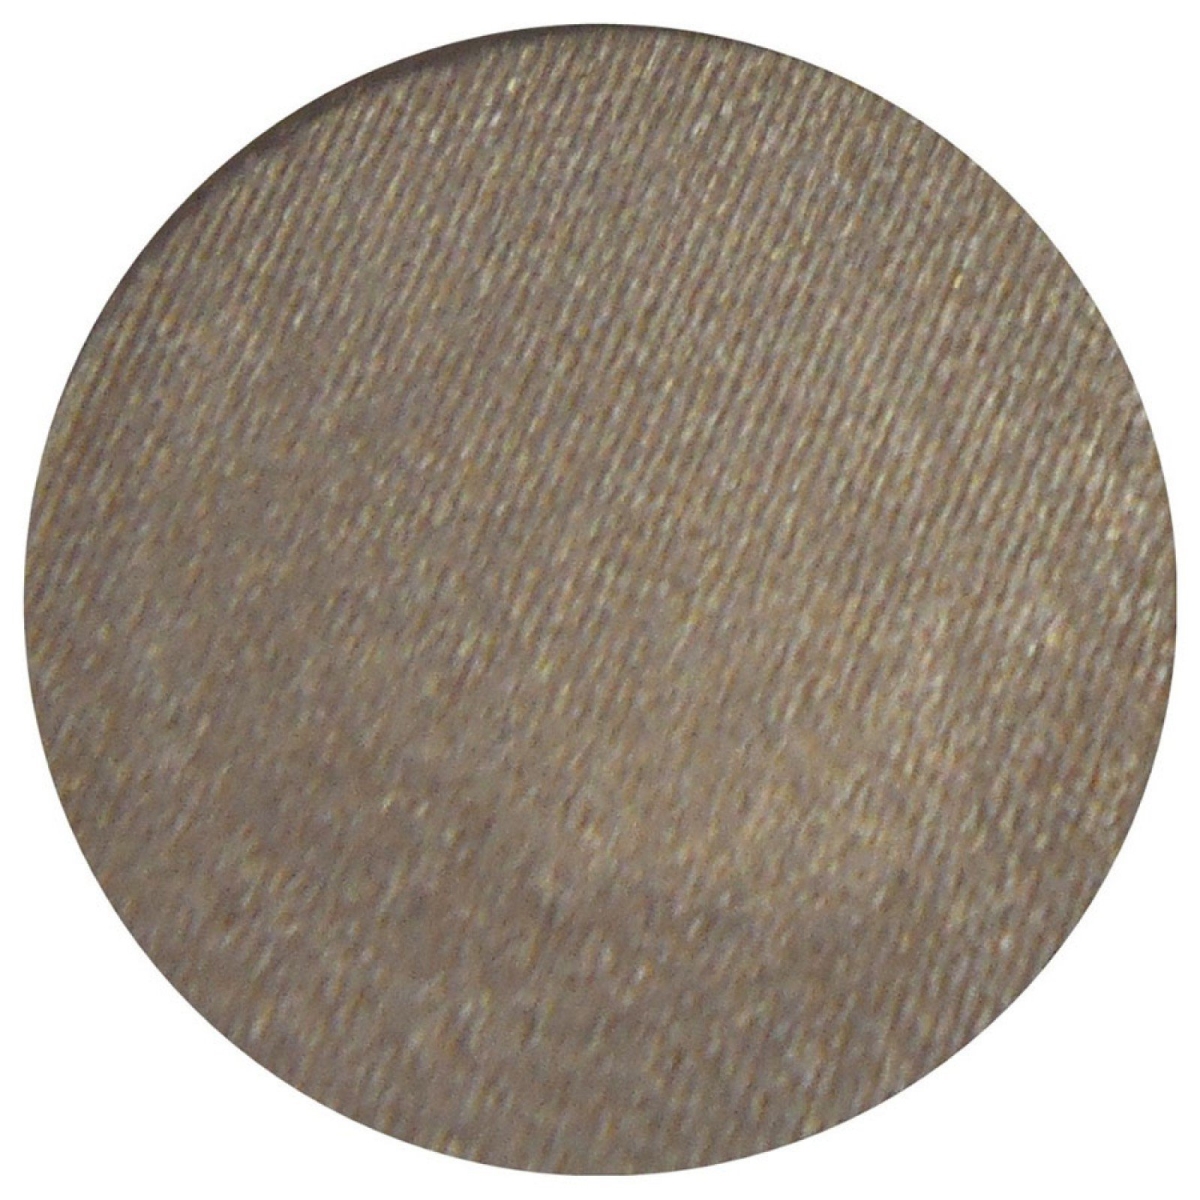 227612 0.045 Oz Honeybee Gardens Natural Cosmetics Tippy Taupe, Plum With Hints Of Brown & Silver Pressed Mineral Eye Shadows